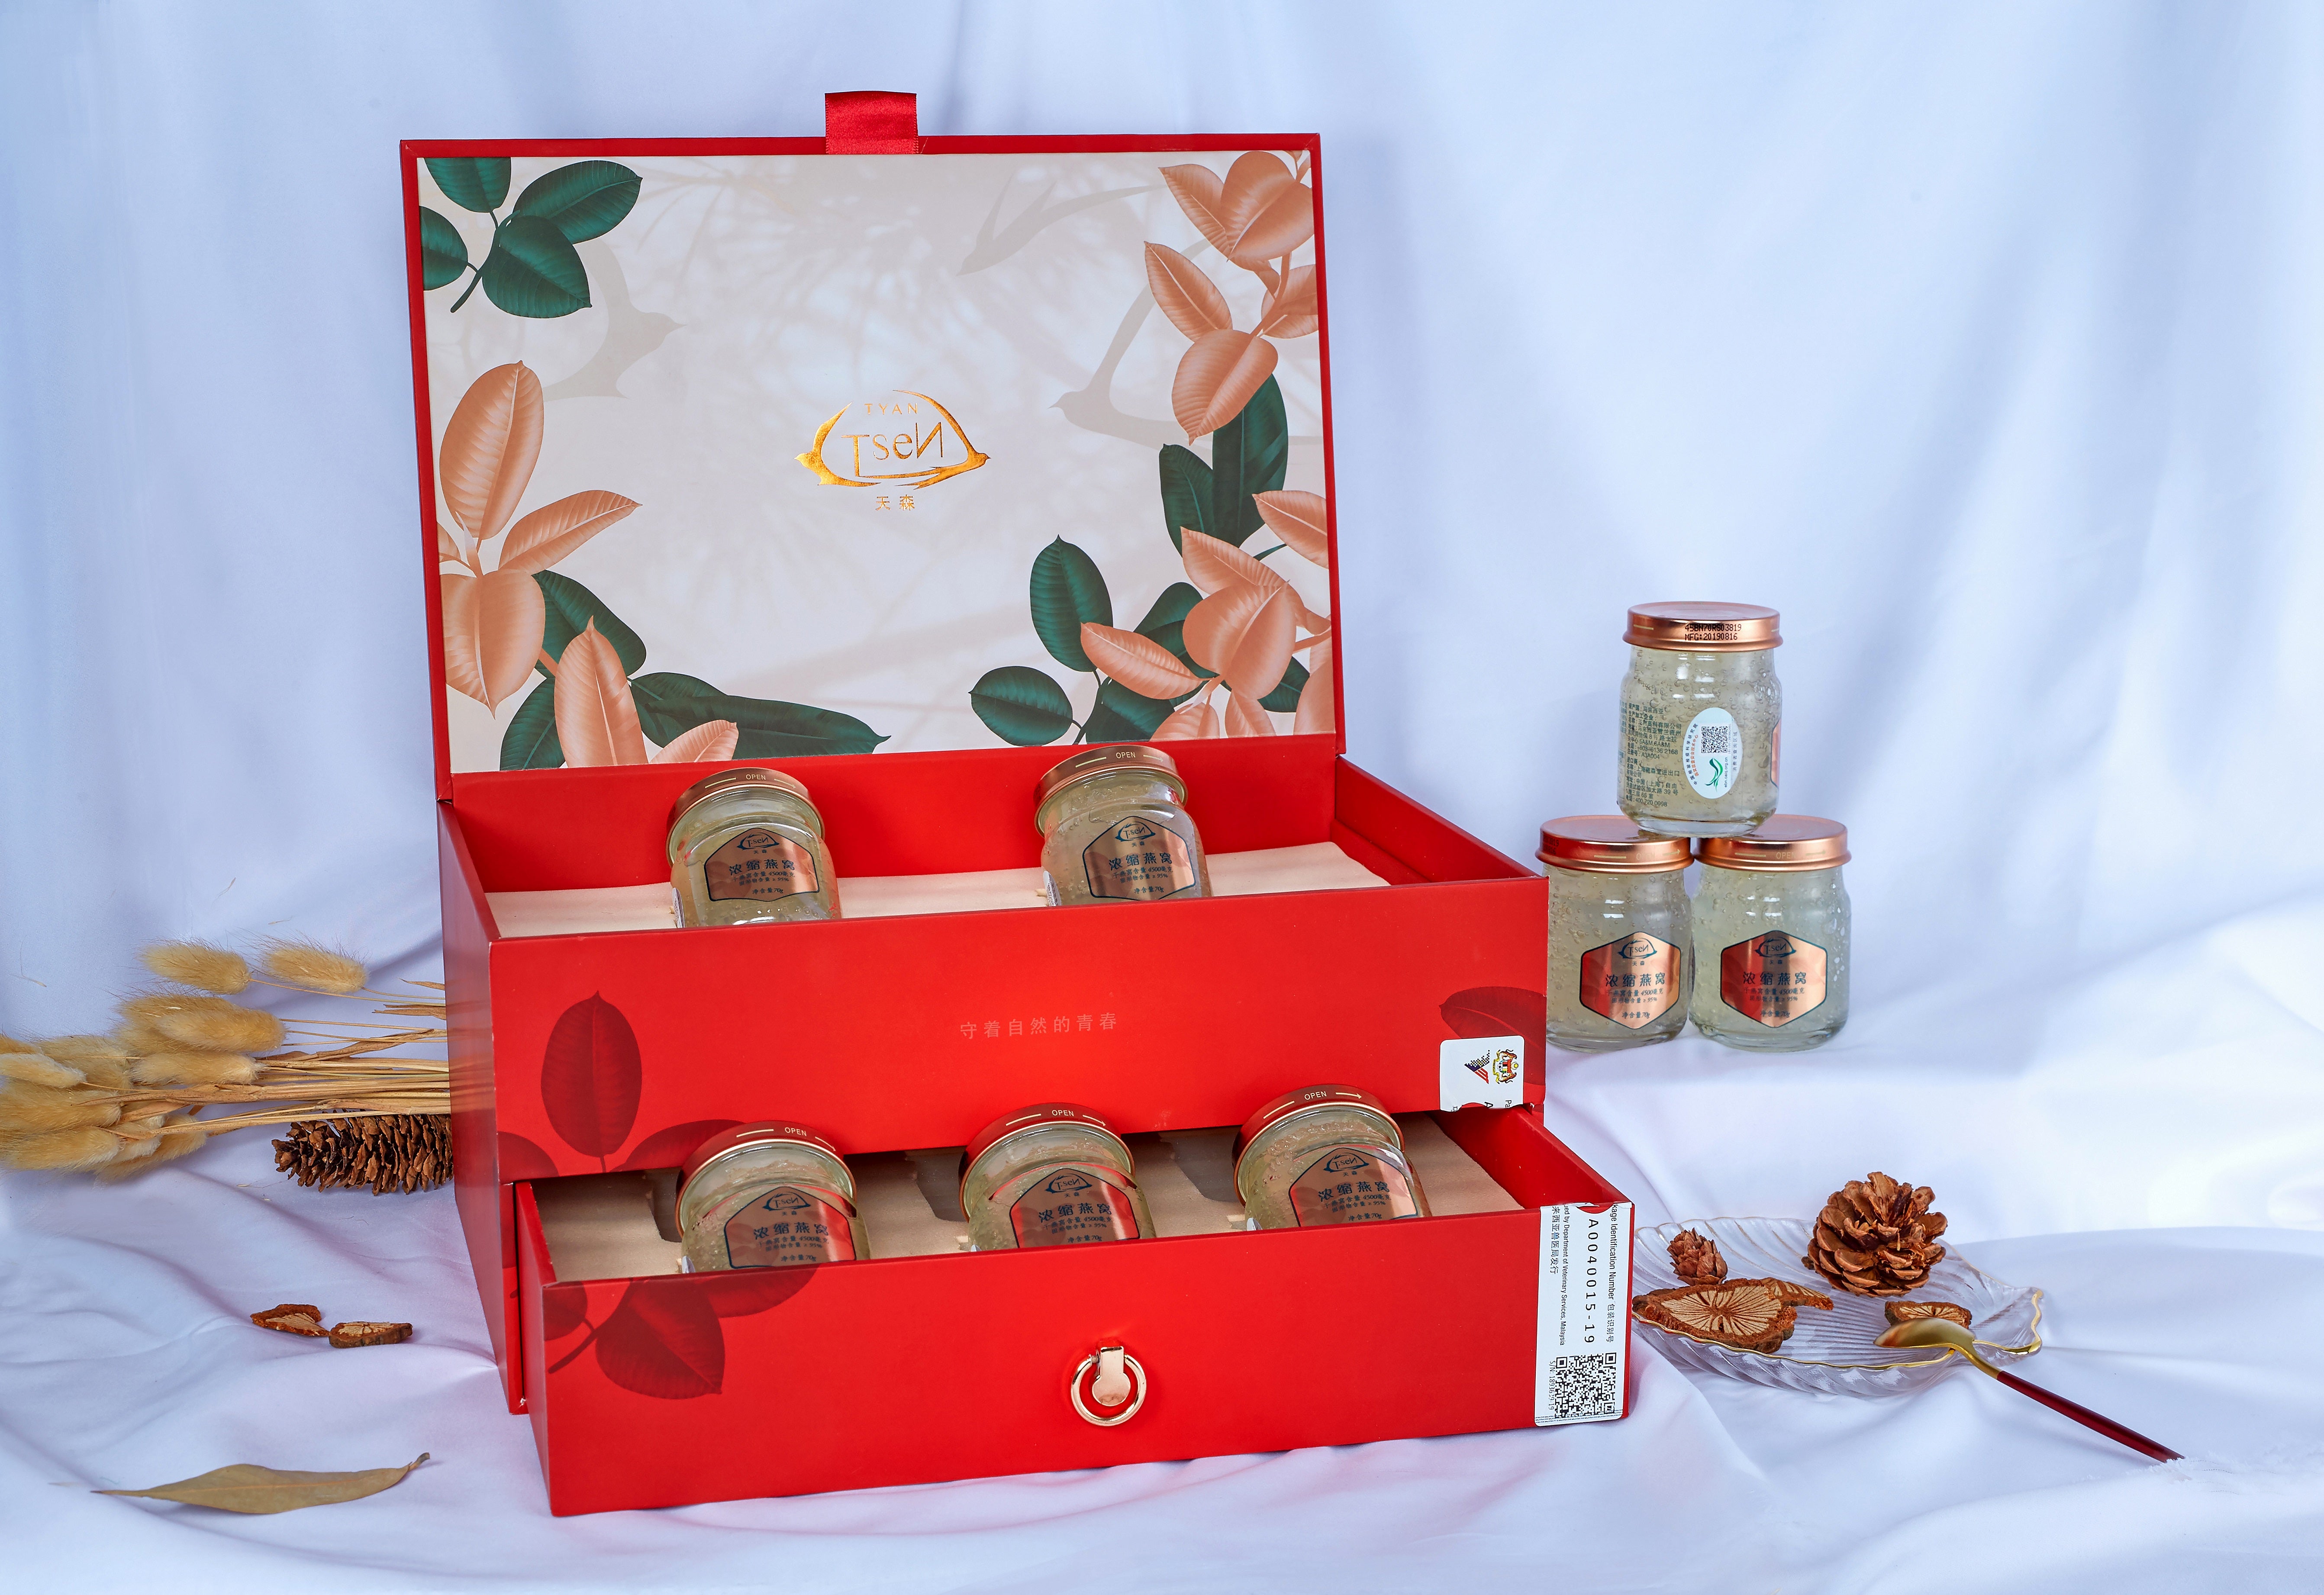 T.seN Pure Concentrated Bird's Nest Premium Gift Box (4.5g Dry Weight)